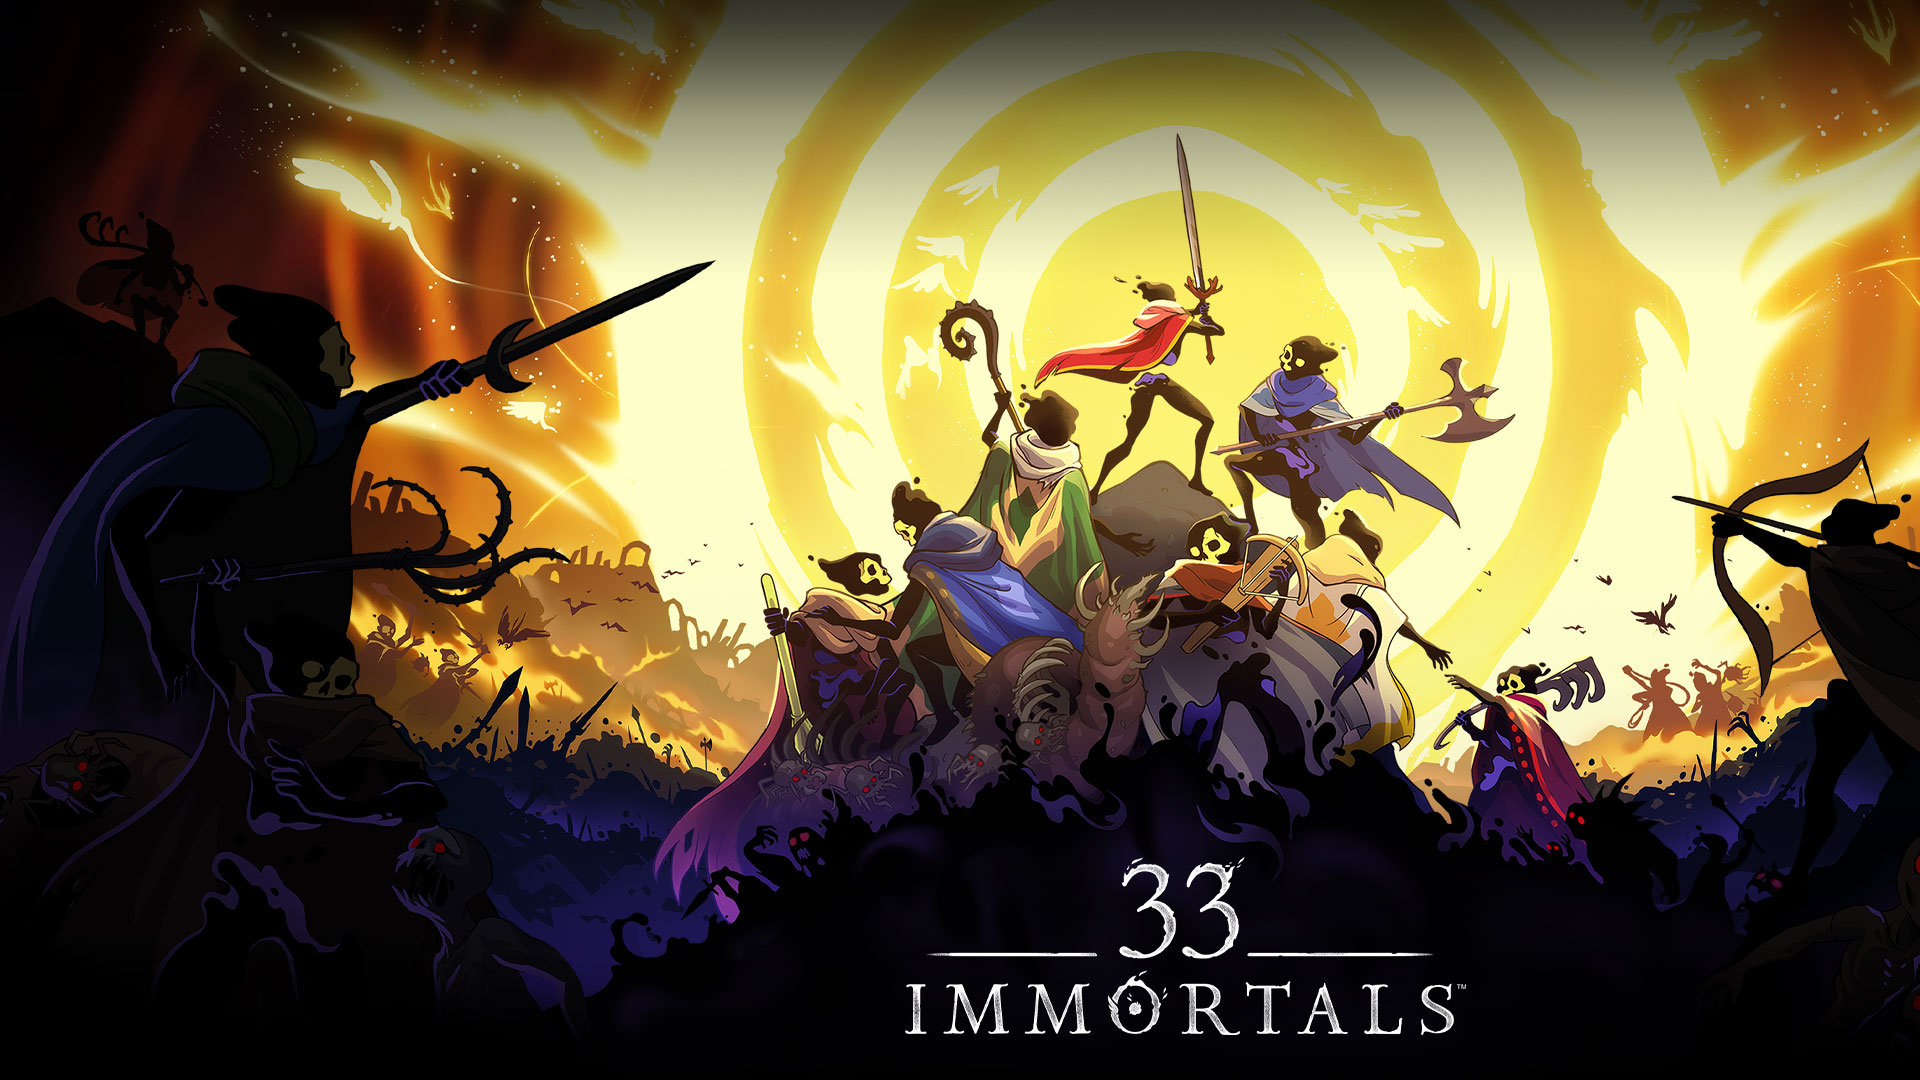 33 Immortals, Immortals raising their weapons on a battle field at a large glowing light in the sky. 